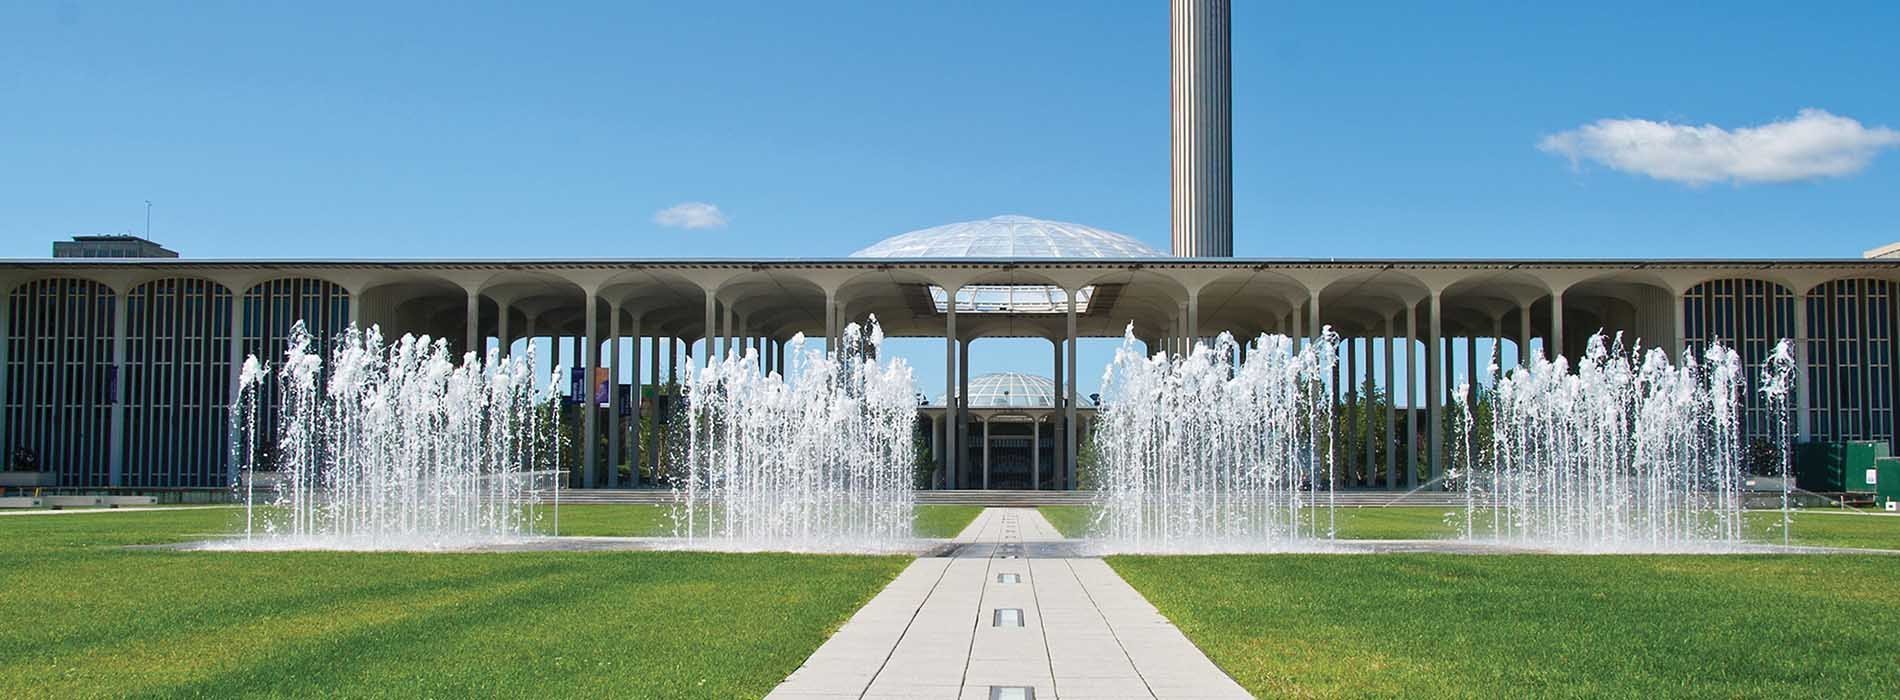 Campus entrance and fountain.